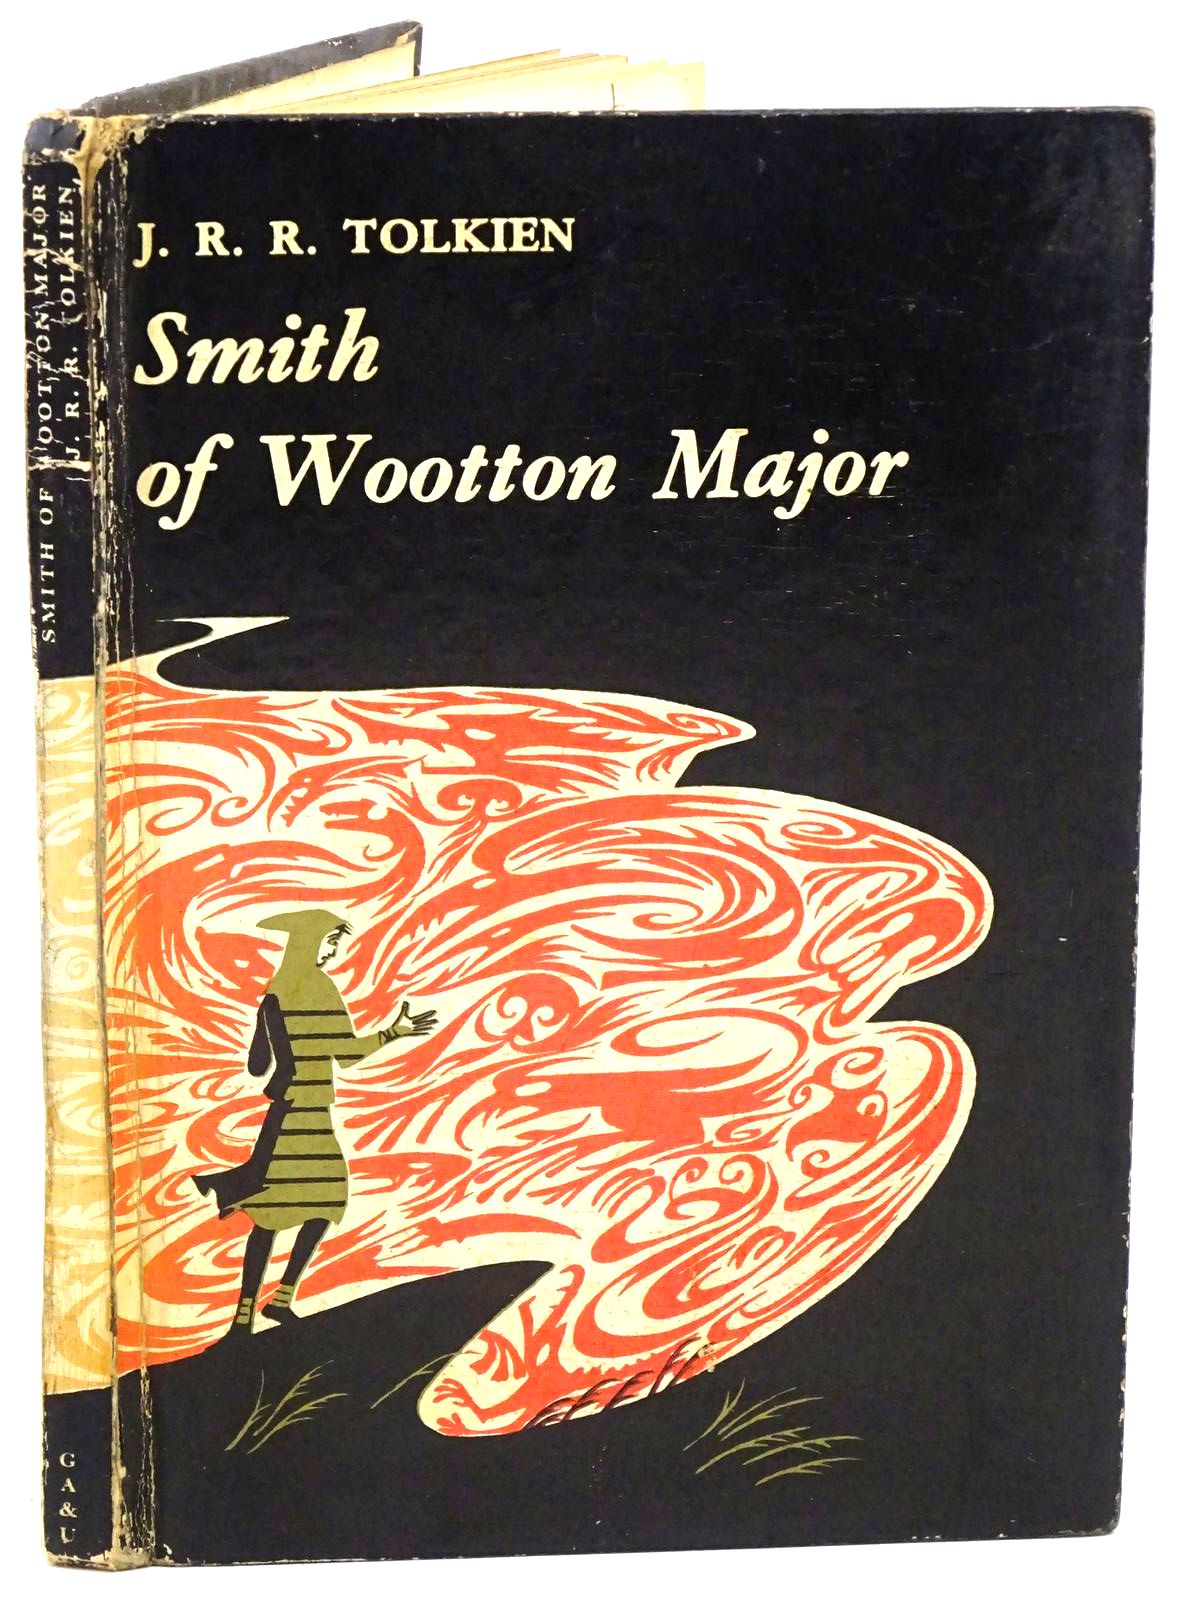 TOLKIEN, J.R.R. ILLUSTRATED BY BAYNES, PAULINE - Smith of Wootton Major